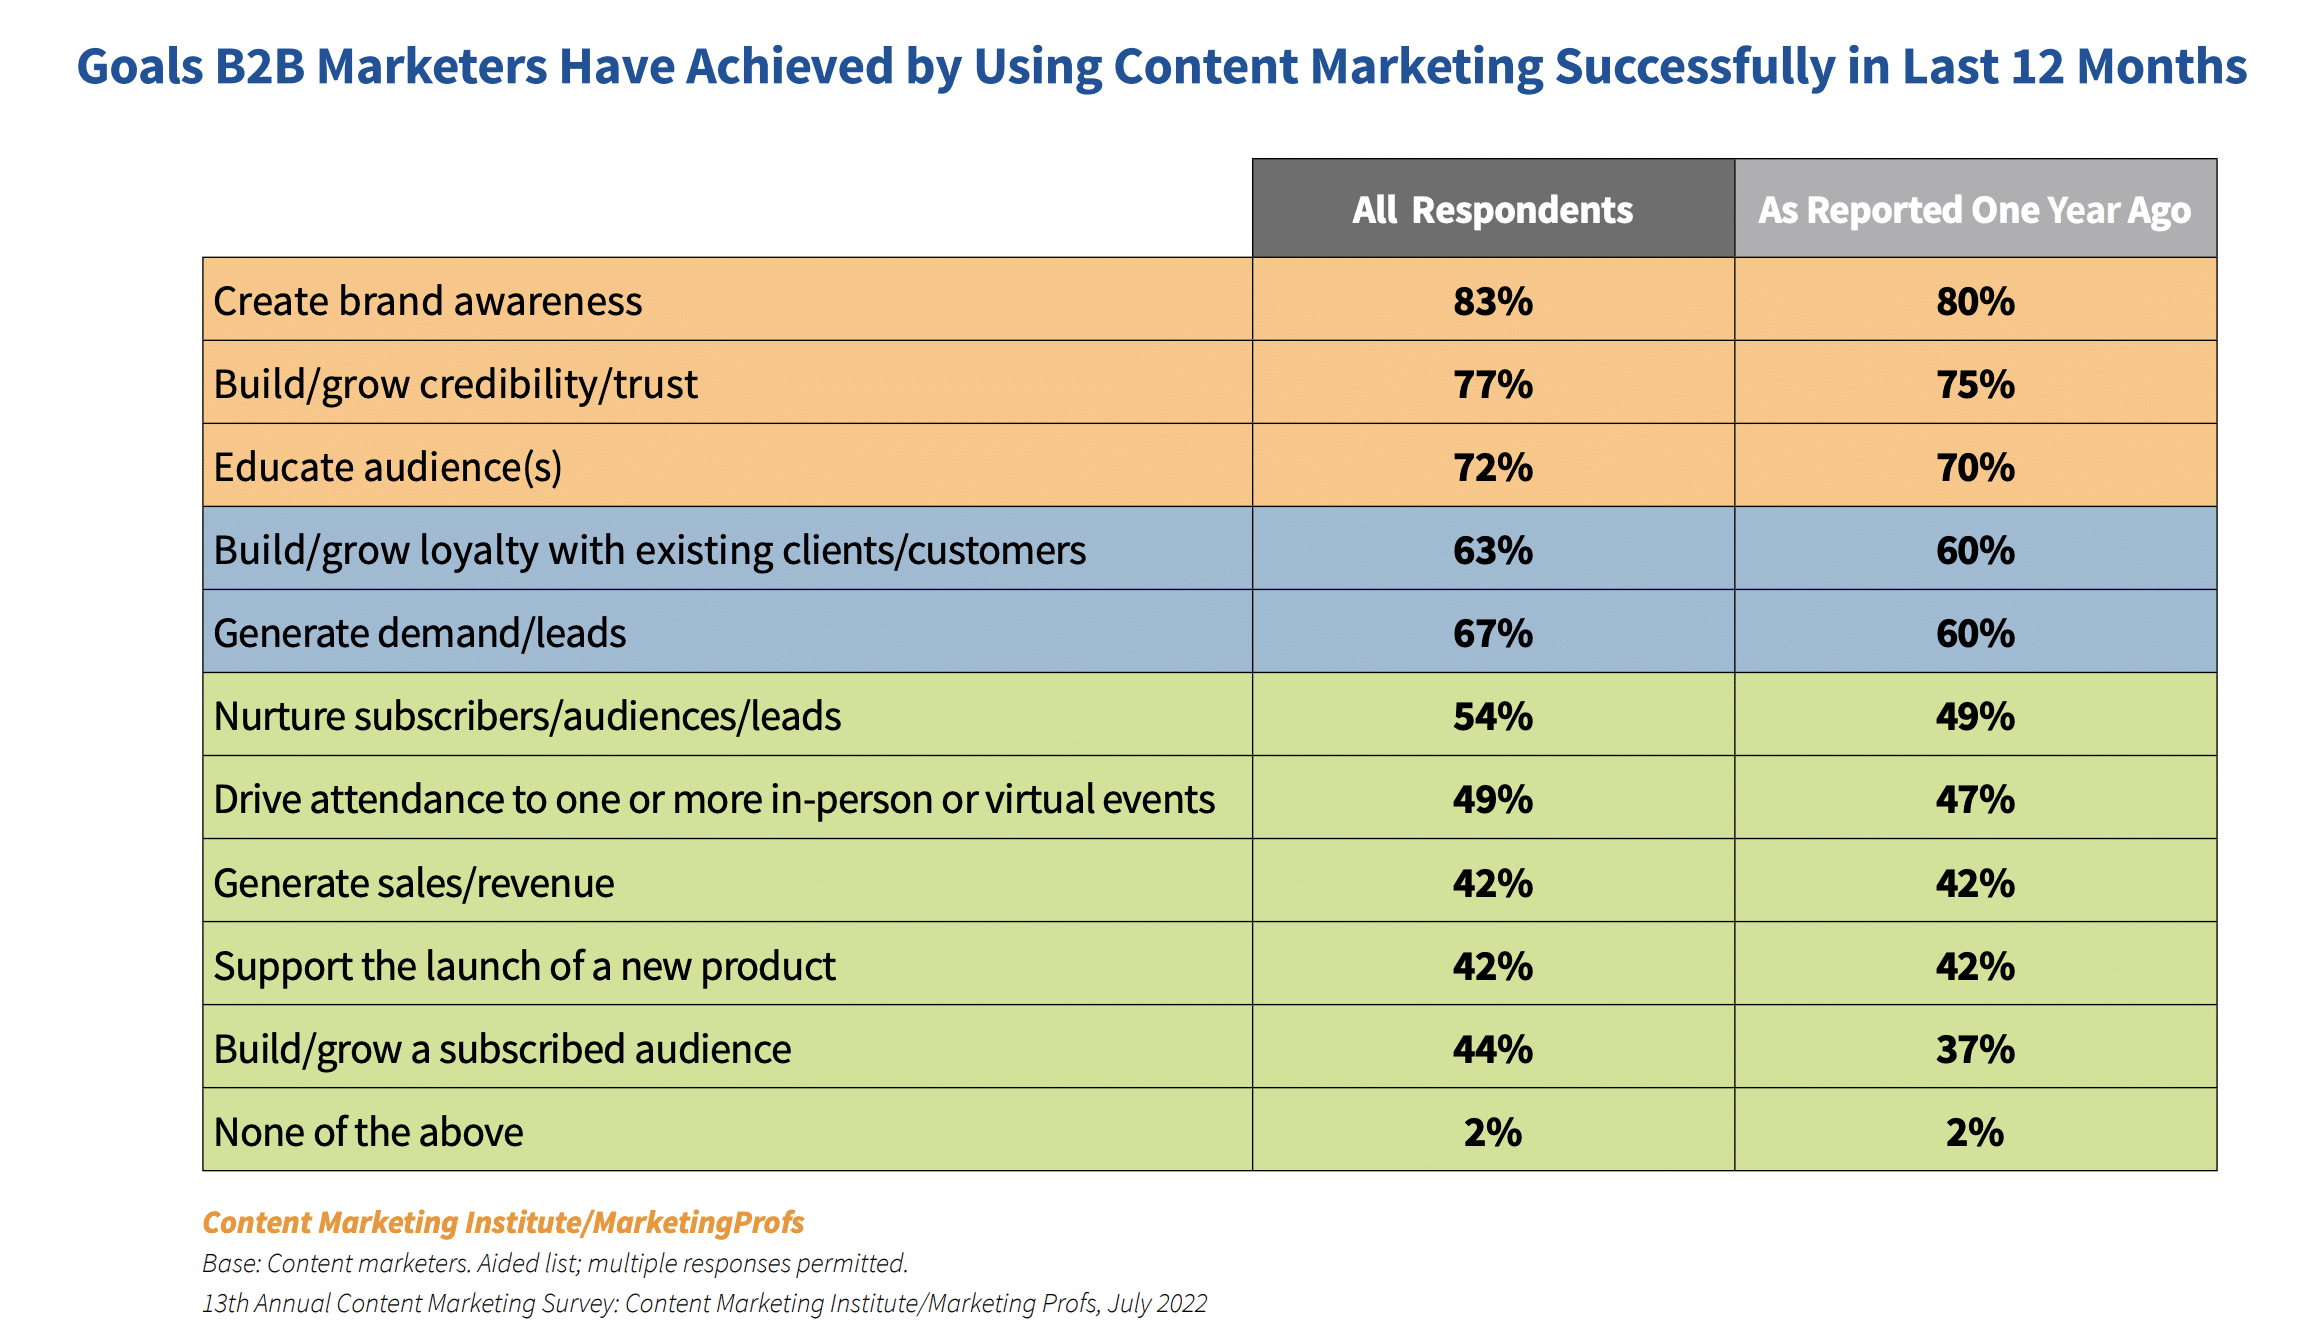 chart shows that 83% of B2B marketers say that the top they achieve through content marketing is creating brand awareness